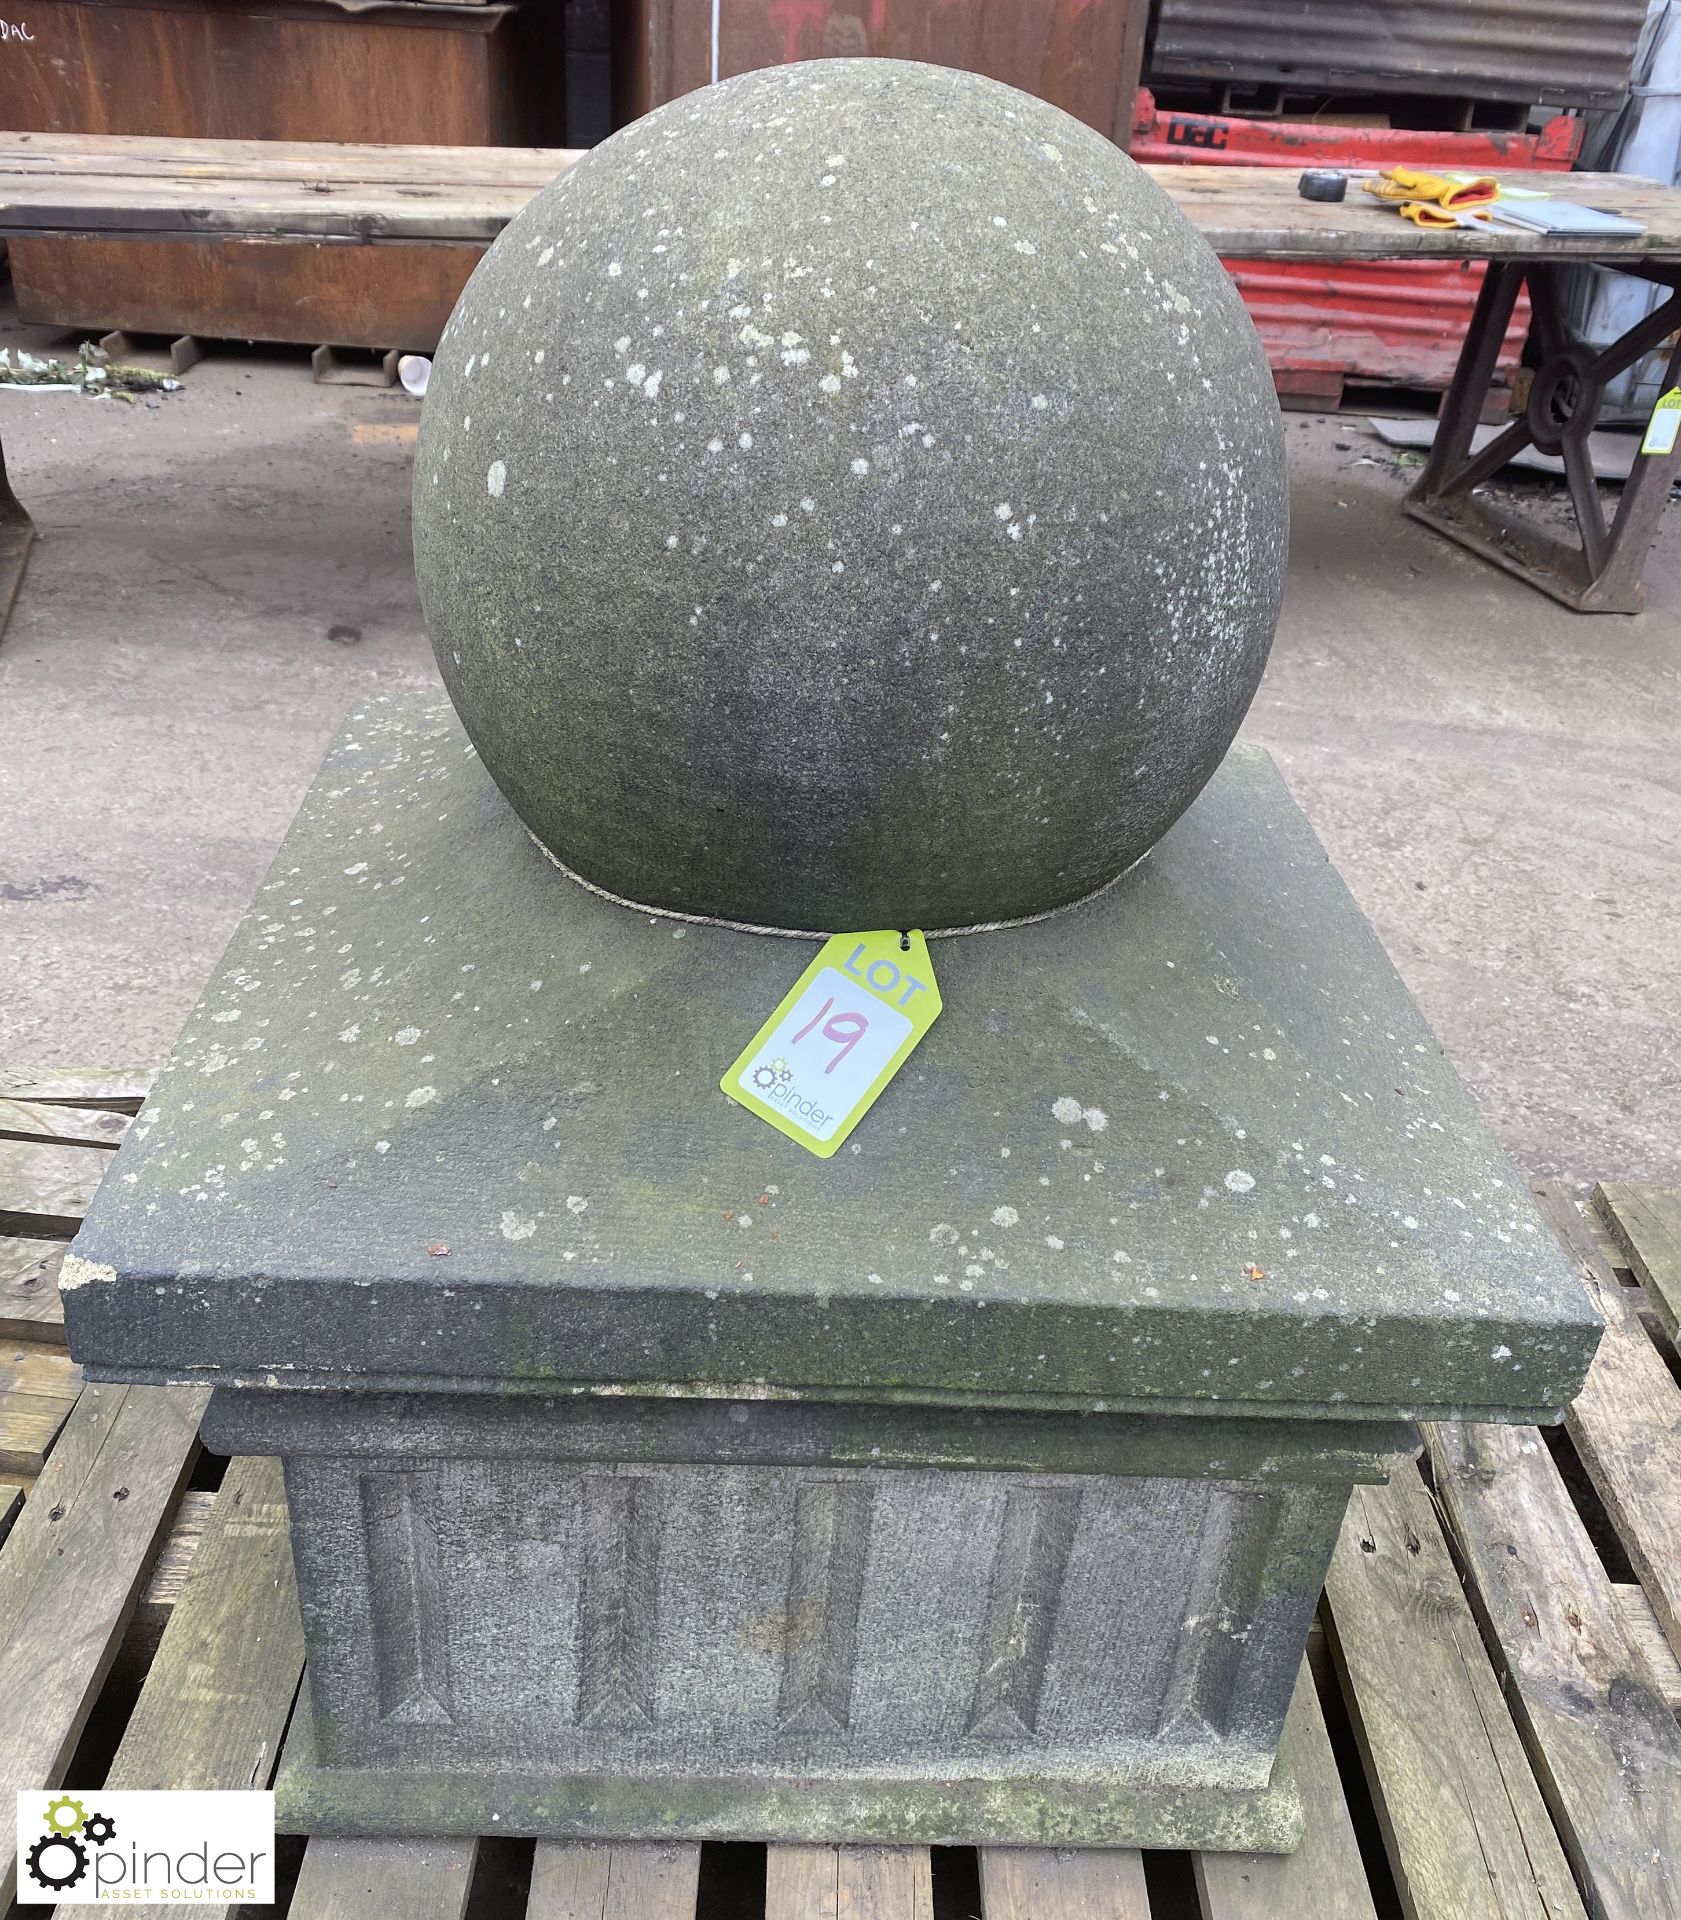 Set 3 Yorkshire stone Gate Post Pier Caps, with ball top, base 600mm x 600mm, 900mm tall - Image 7 of 11